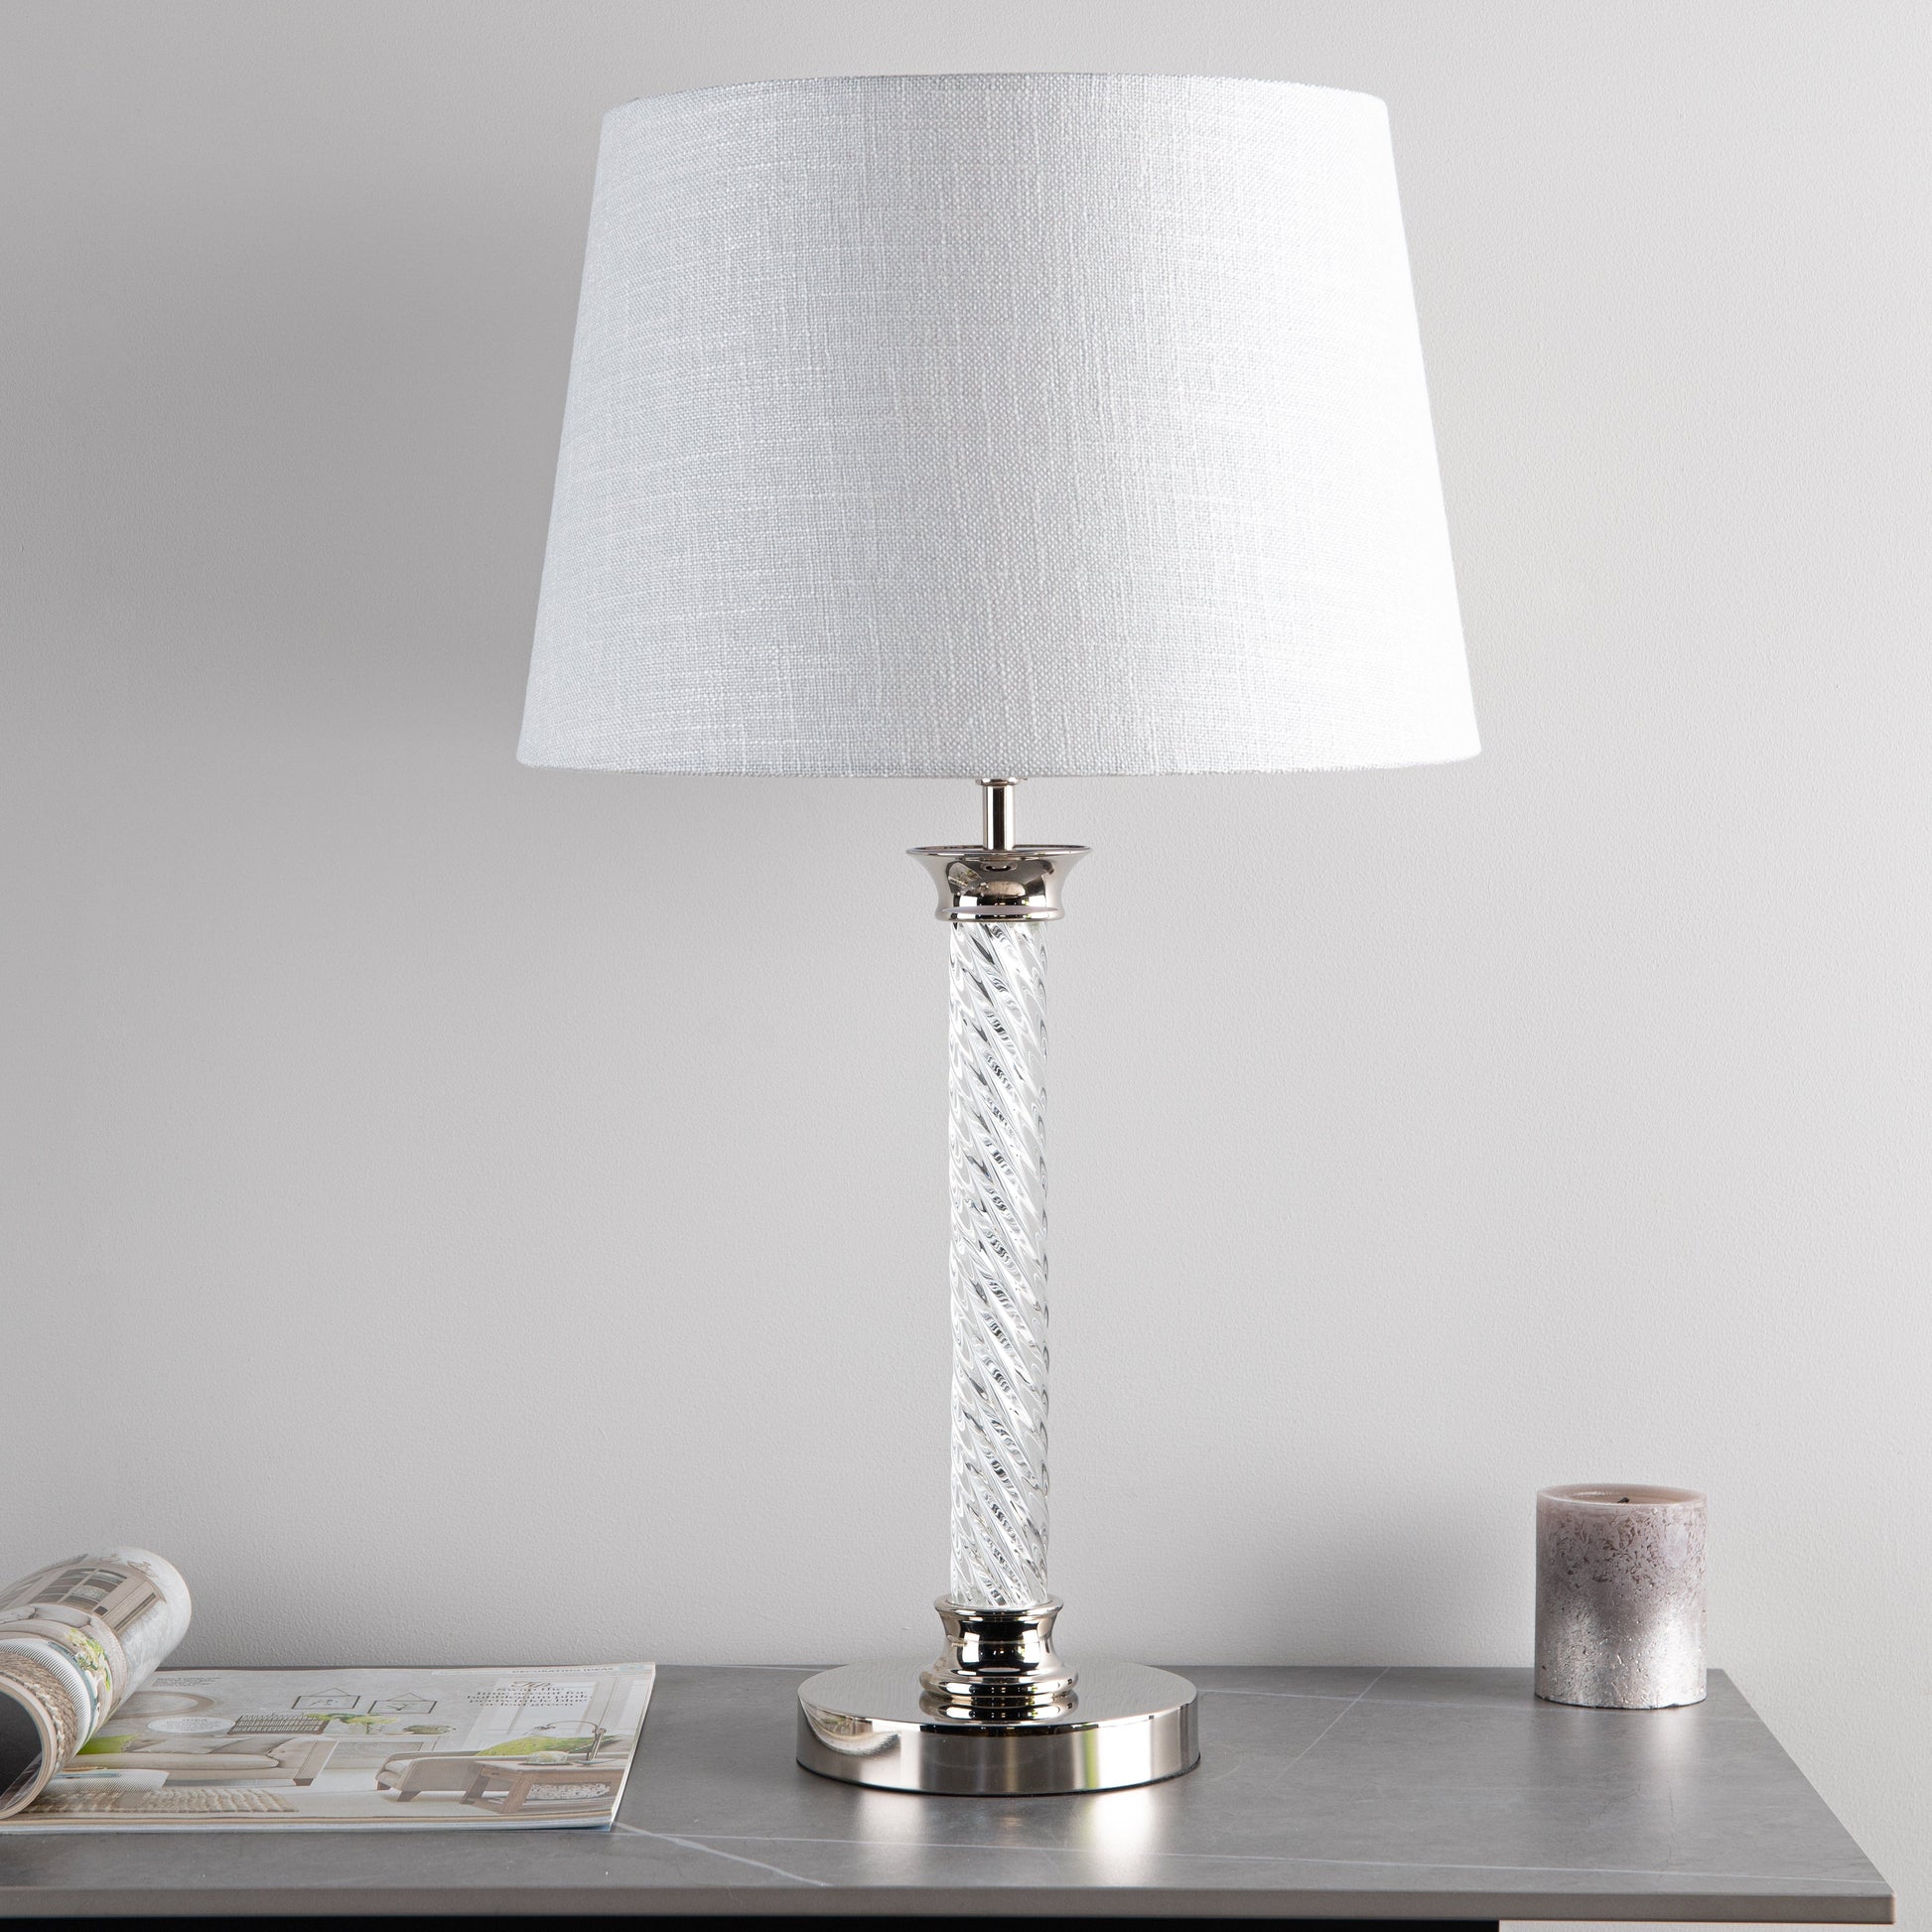 Lights  -  Laura Ashley Silver Louis Table Lamp  -  60002554